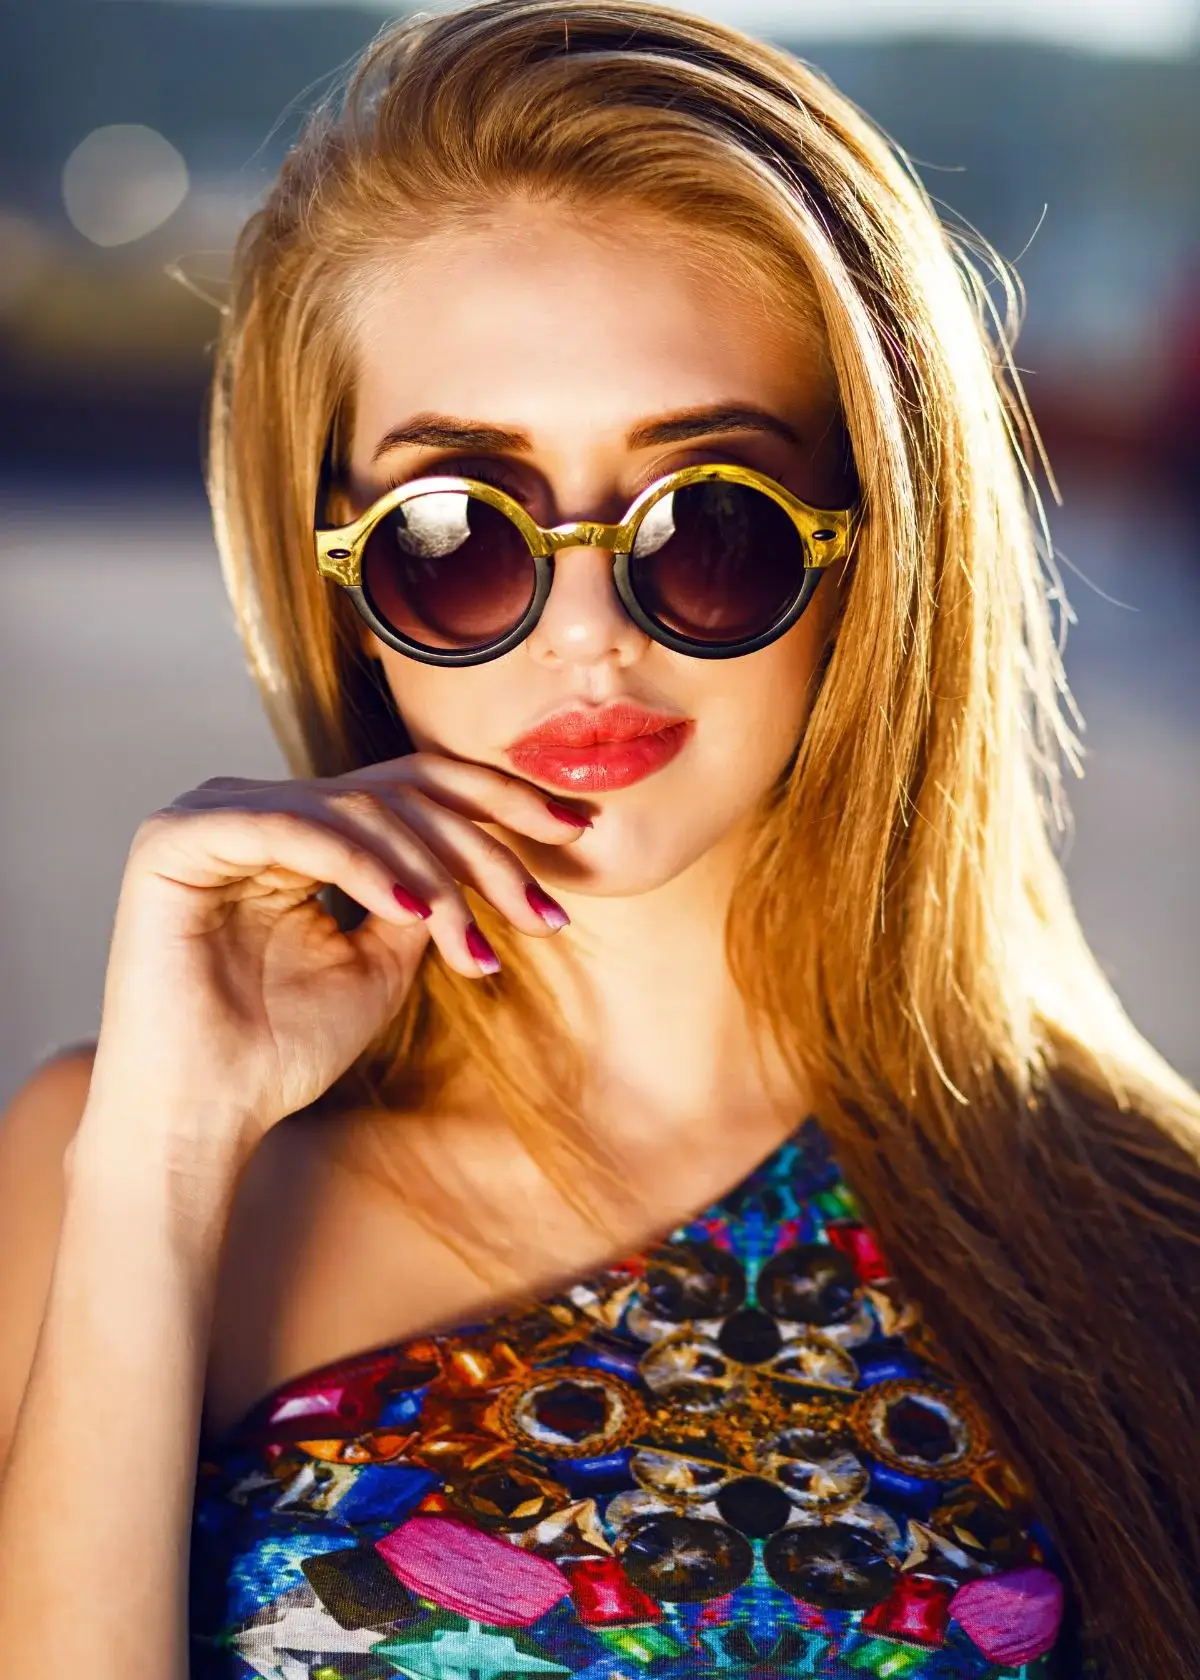 How to choose the right popular sunglasses for women?